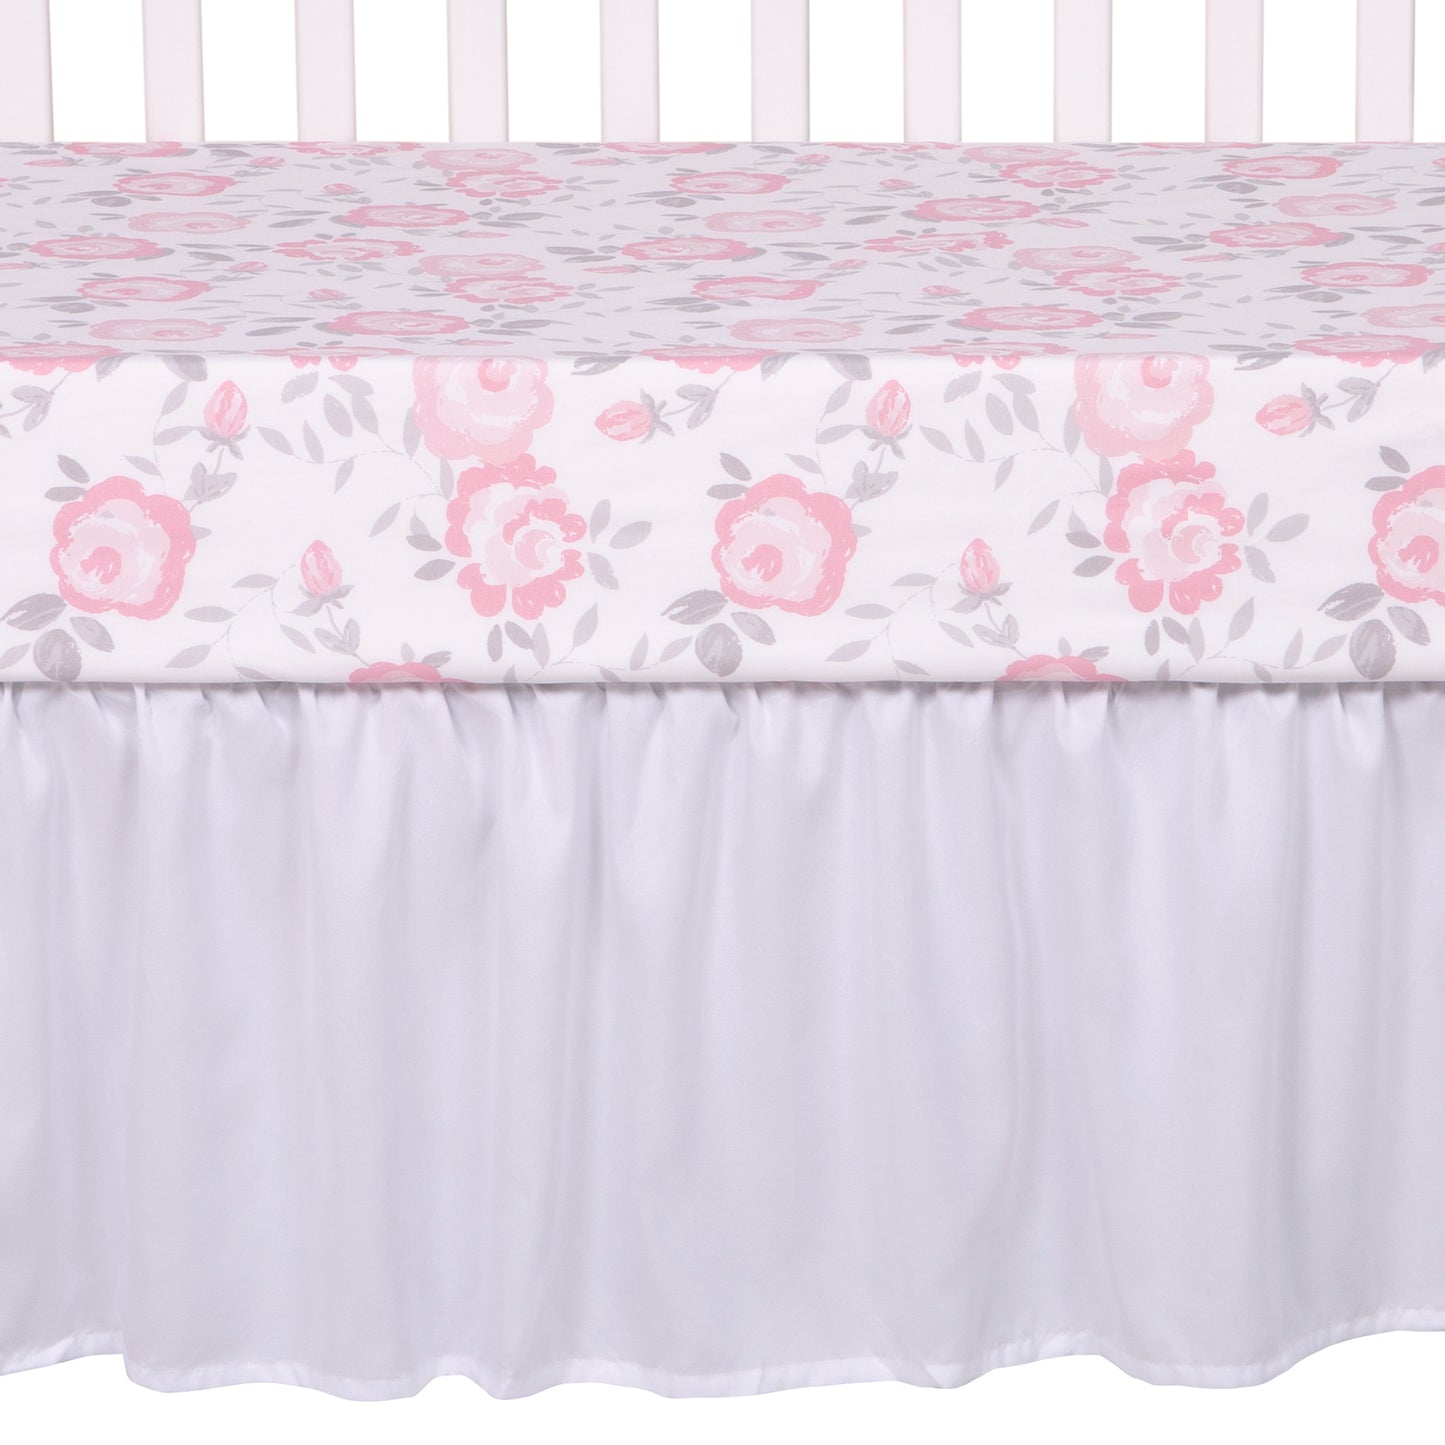  Emma 4 Piece Crib Bedding Collection by Sammy and Lou; crib sheet and crib skirt. Crib skirt t fits standard crib mattress 28 in x 52 in with 14-inch drop and is a solid pink with ruffled detailing.